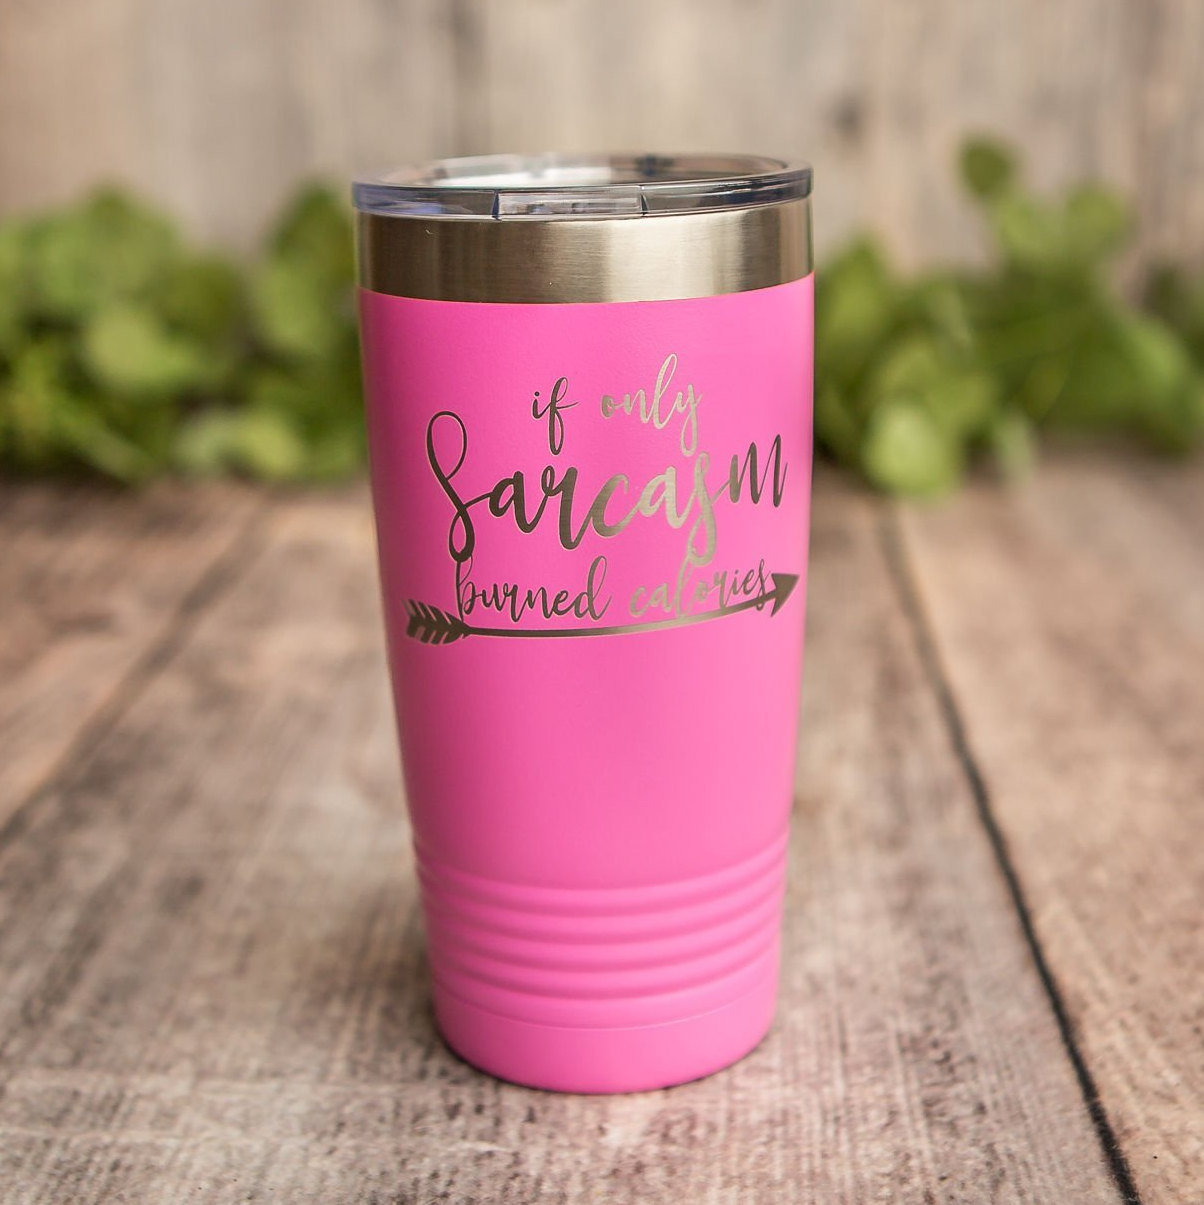 https://3cetching.com/wp-content/uploads/2020/09/if-only-sarcasm-burned-calories-engraved-stainless-steel-tumbler-yeti-style-travel-cup-funny-travel-mug-gift-5f5fb2a8.jpg